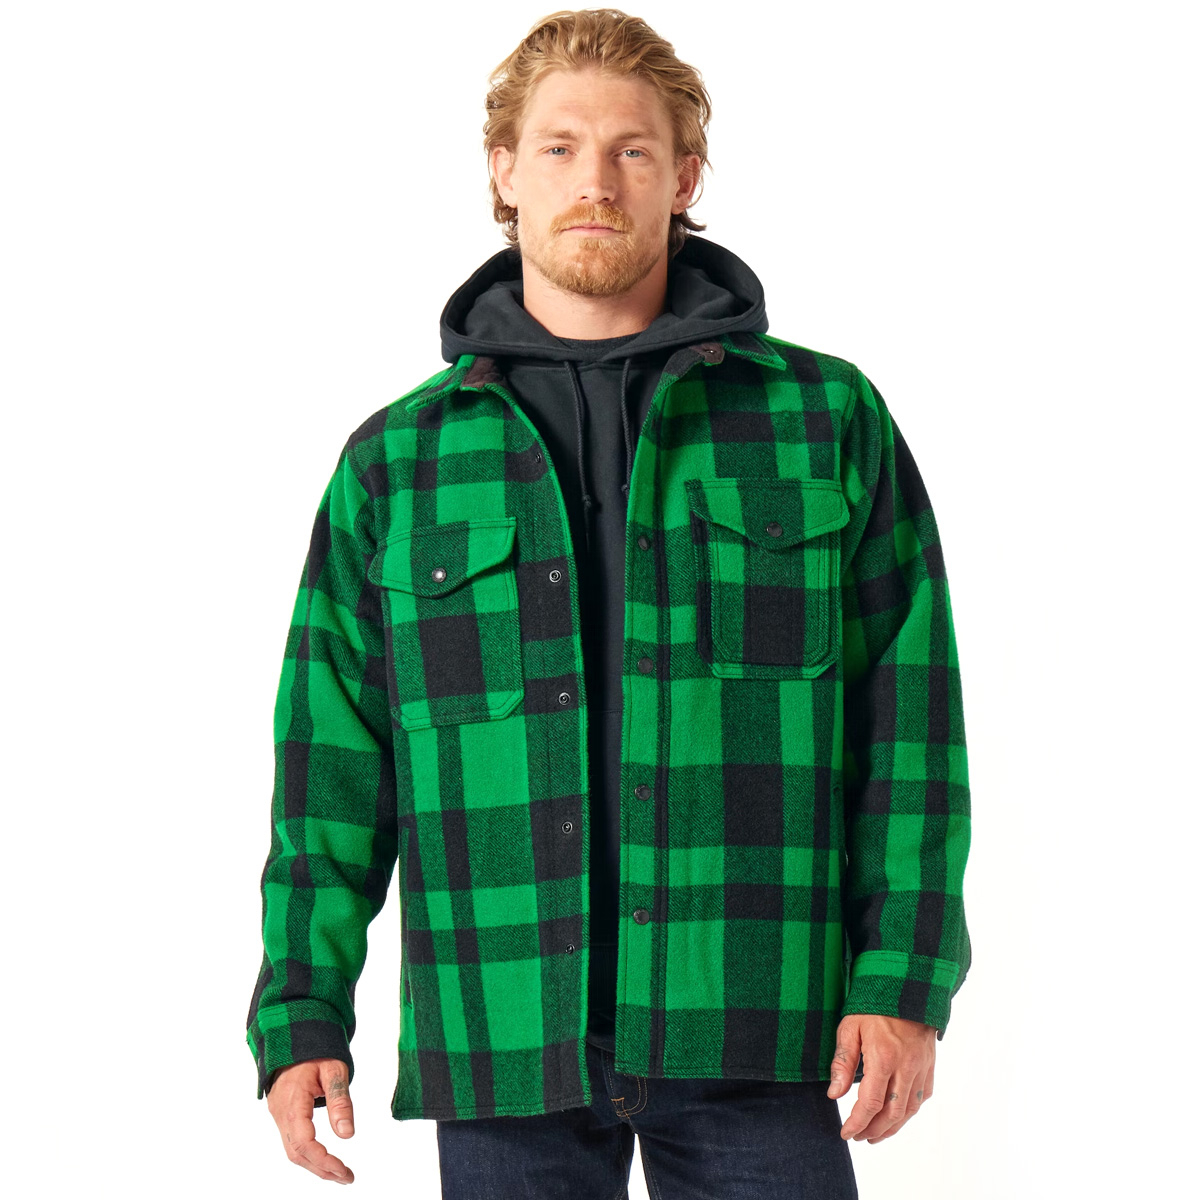 Filson Mackinaw Jac Shirt Acid Green/Black Heritage Plaid, Made of 100% virgin Mackinaw Wool for comfort, natural water-repellency and insulating warmth in any weather conditions